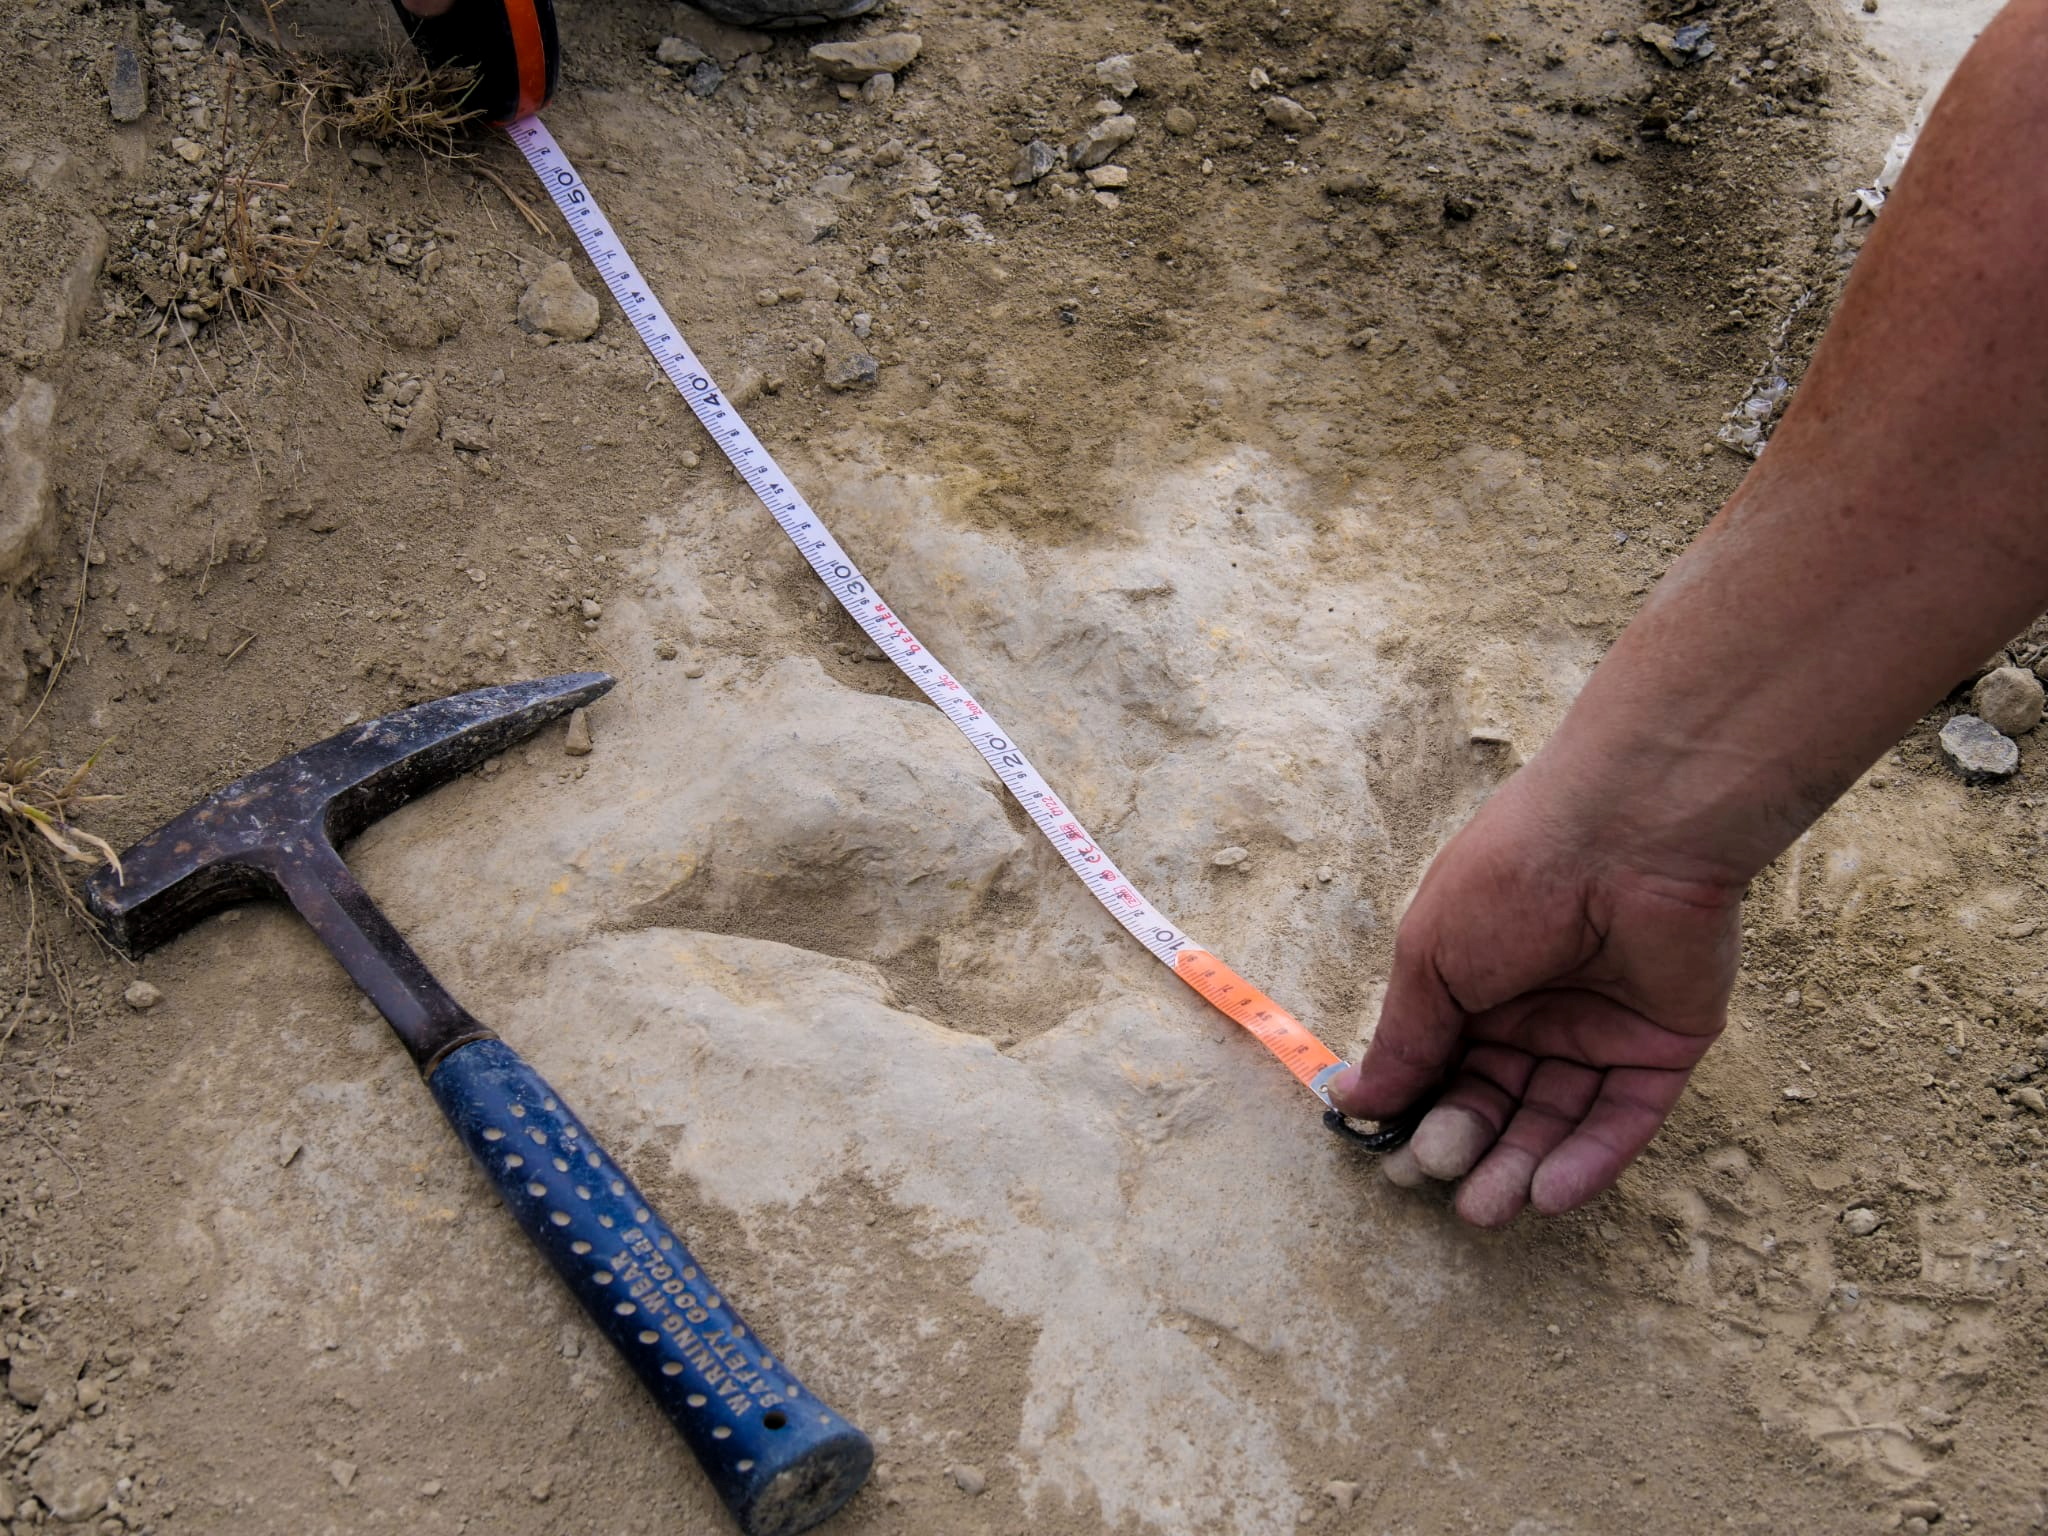 Researchers measure a fossilized dinosaur footprint made about 120 million years ago